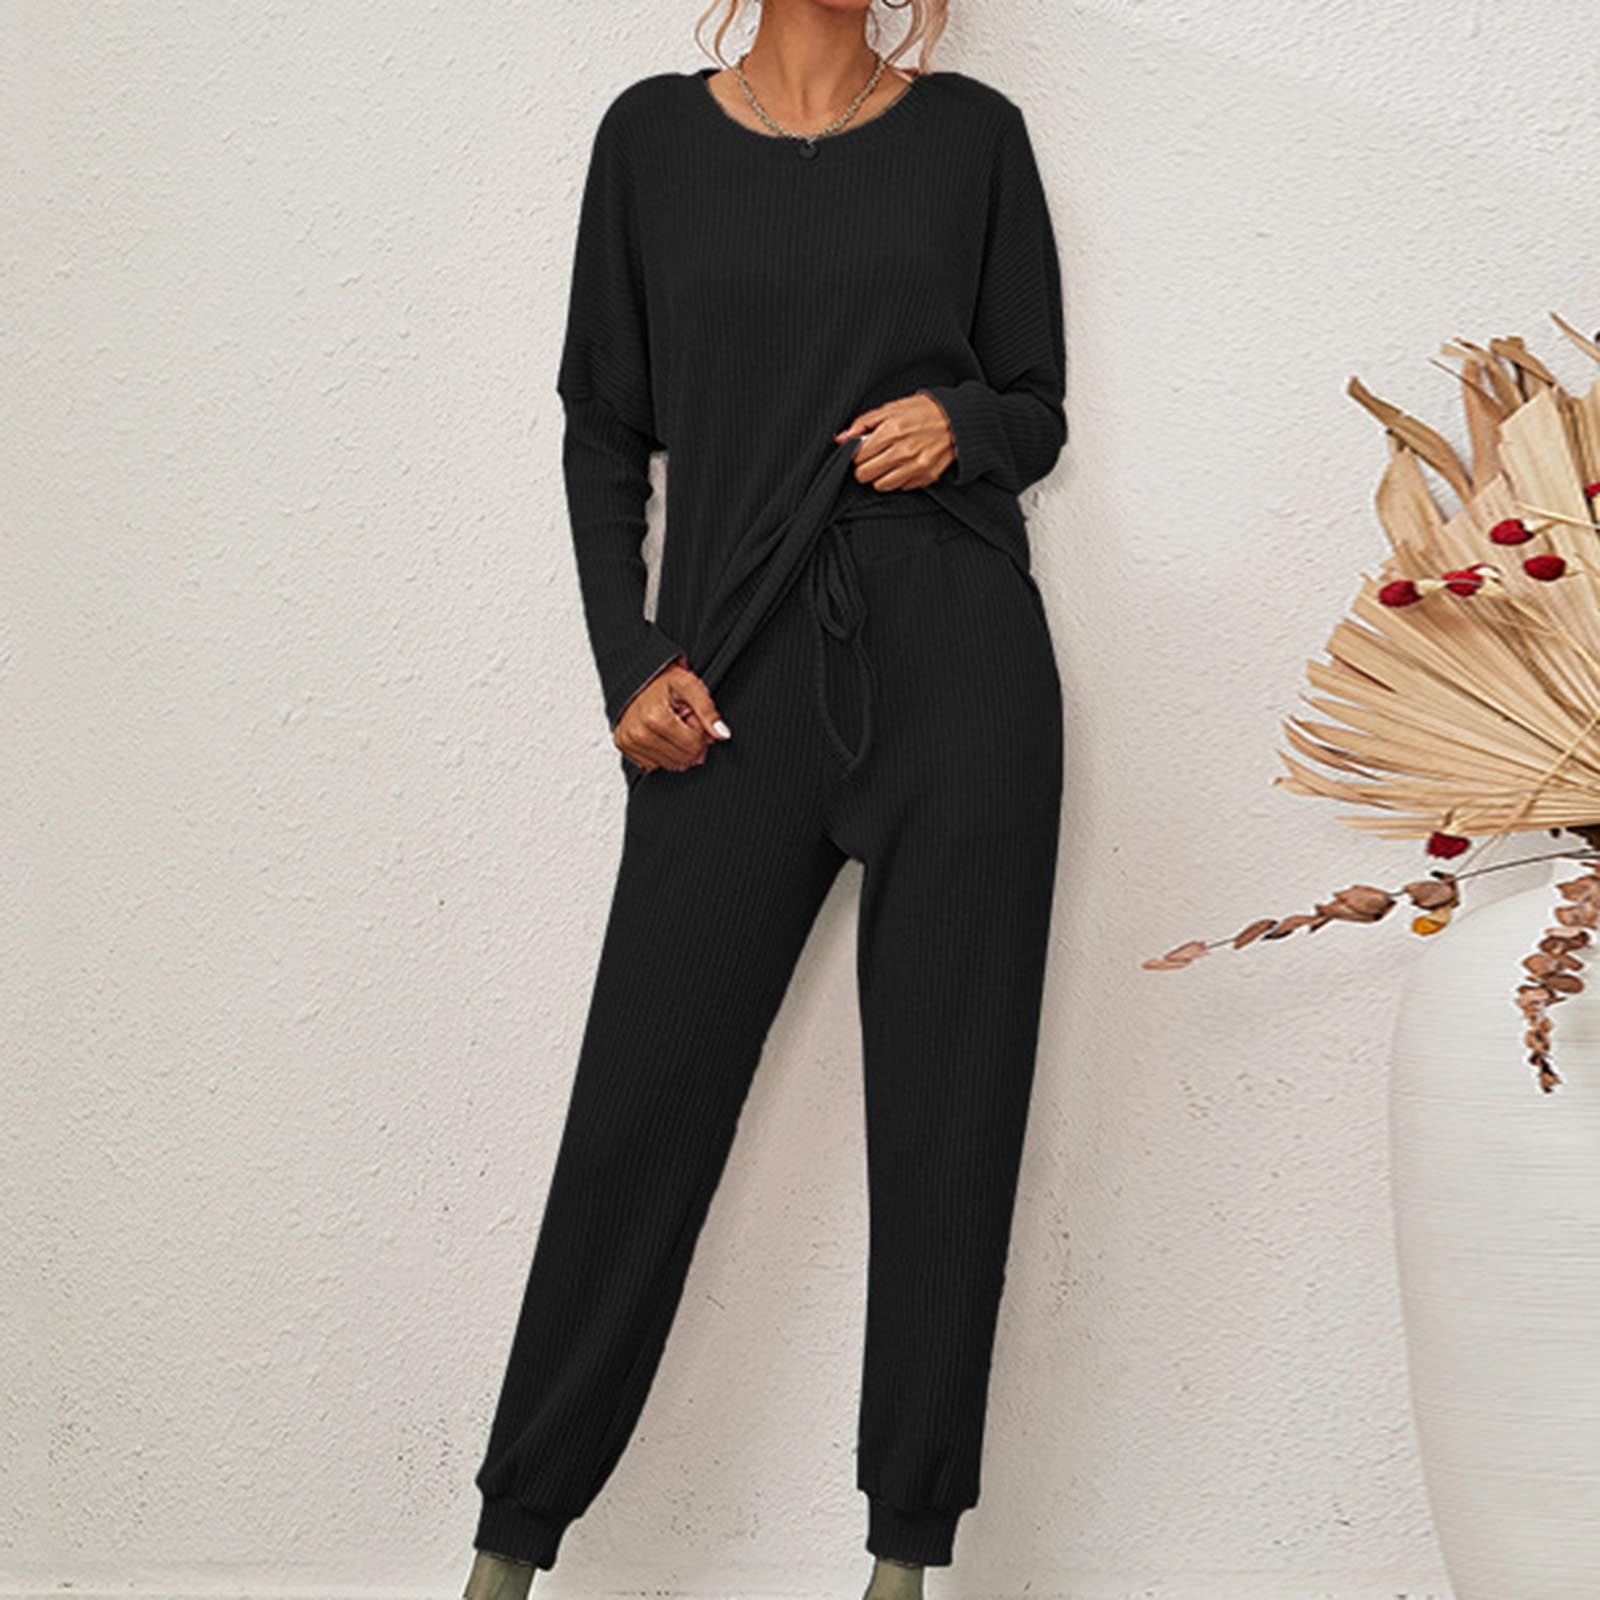 JNGSA 2 Piece Lounge Set Women,Women's Ribbed Lounge Sets Solid Color Loose  Casual Long Sleeve Shirt and Drawstring Pants Two Piece Pajamas Sets Black